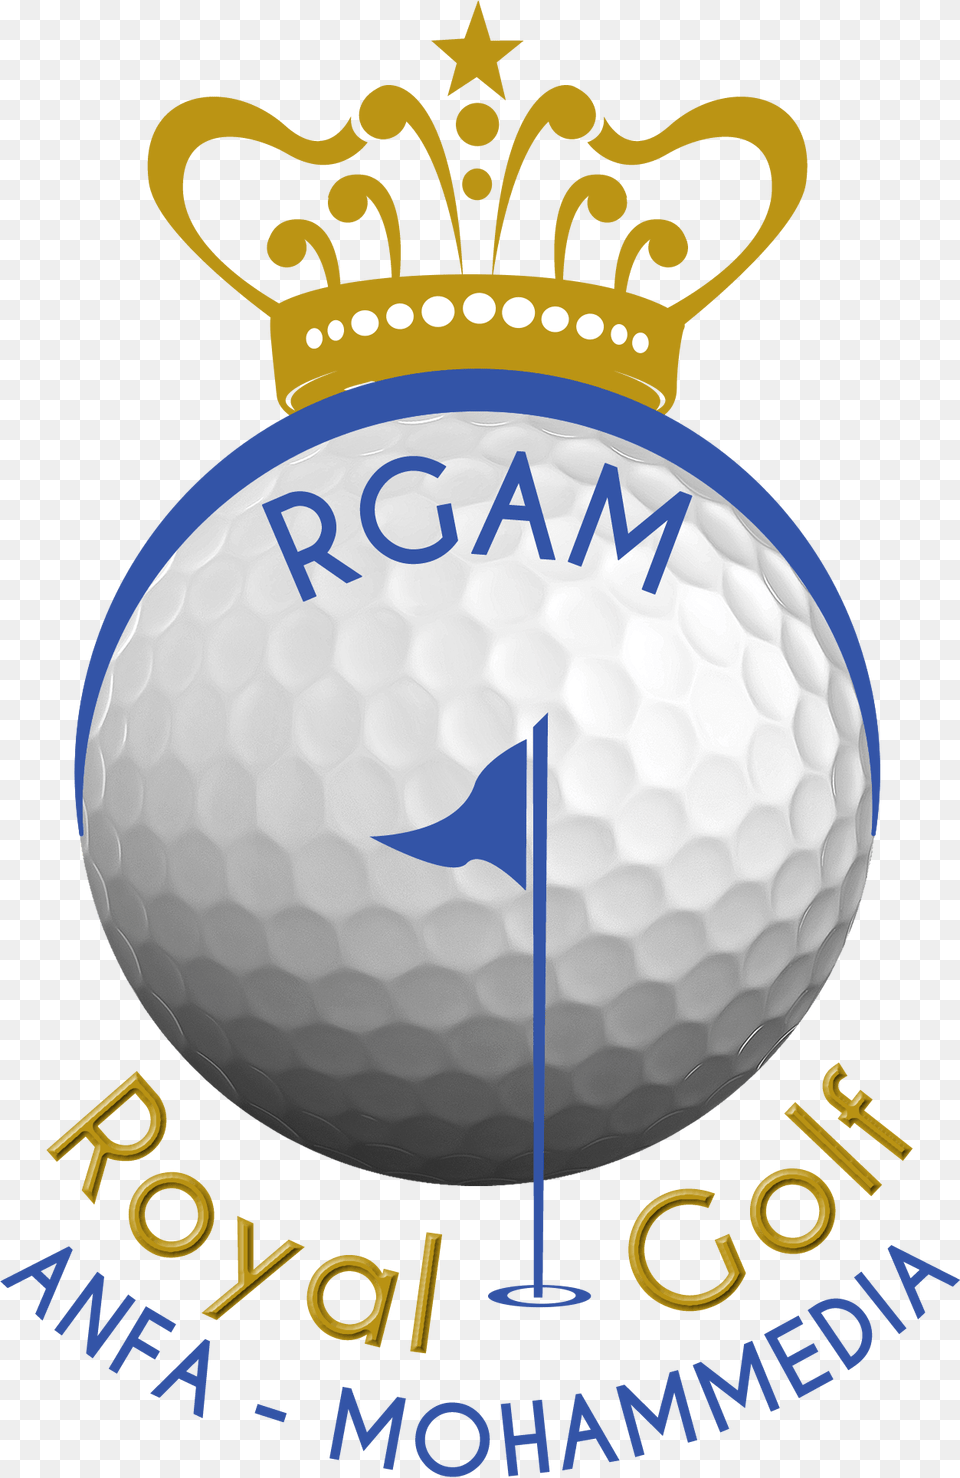 Royal Golf Anfa Mohammedia, Ball, Golf Ball, Sport, Rugby Free Png